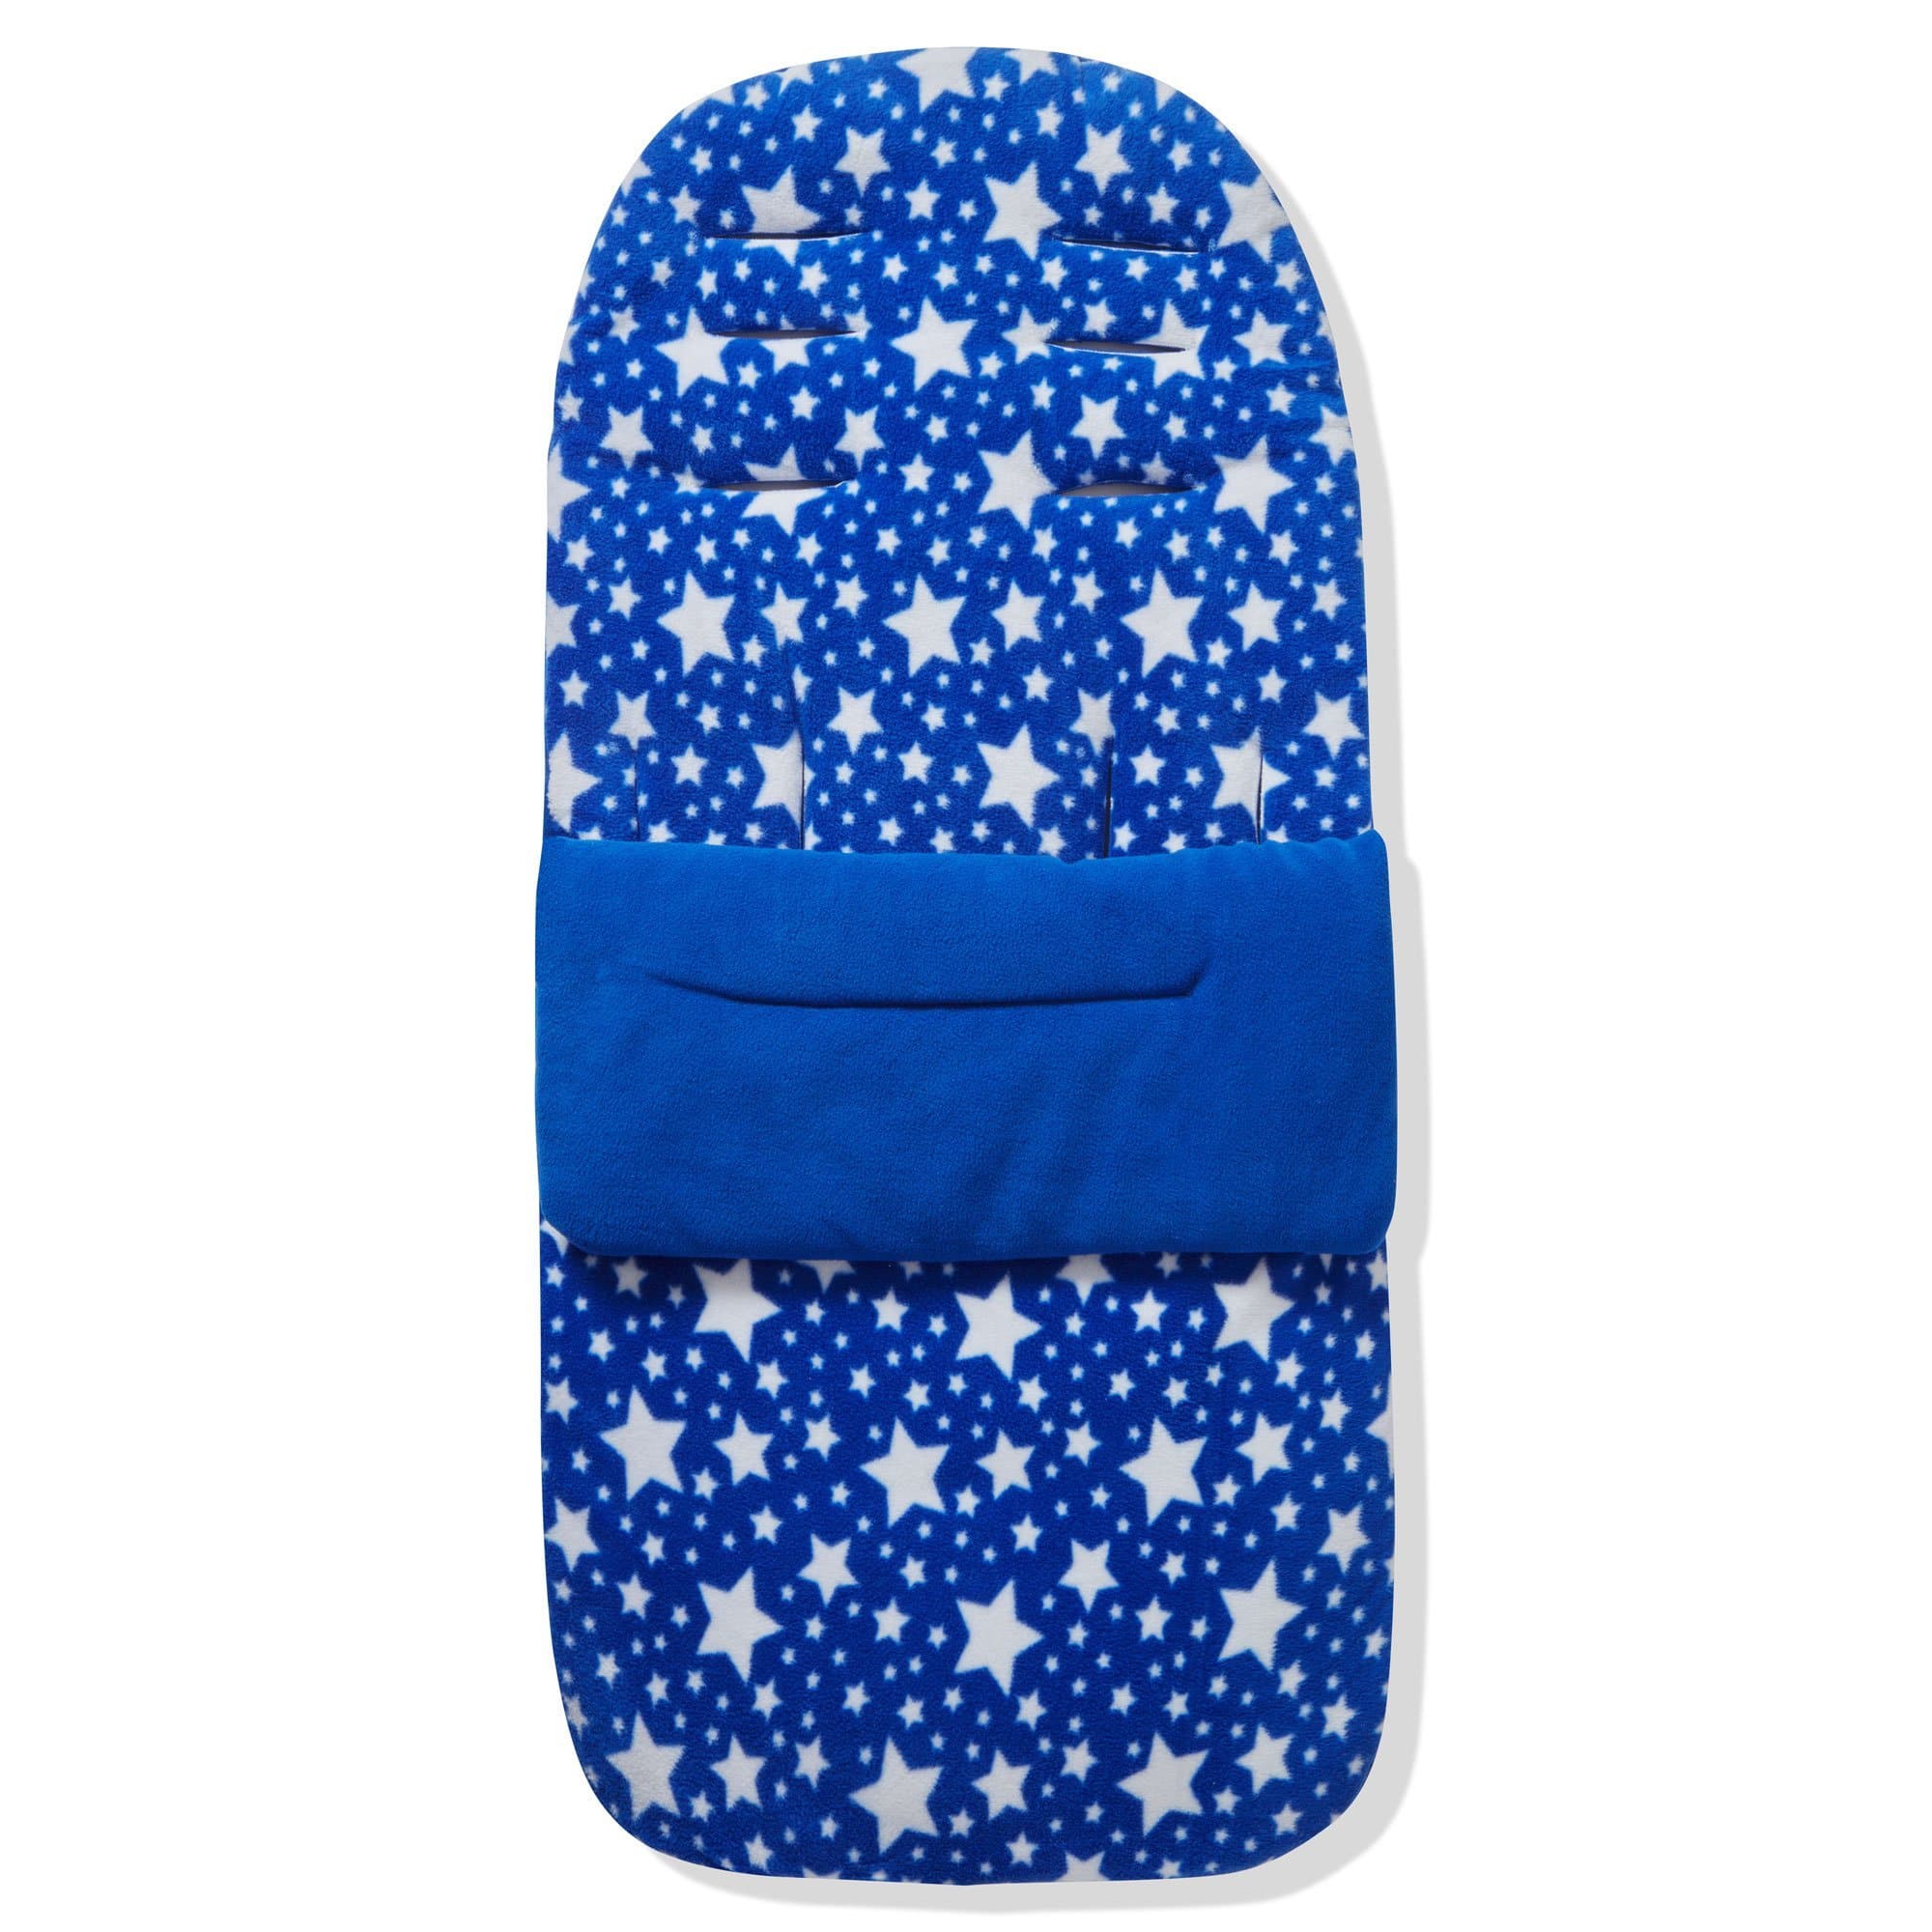 Fleece Footmuff / Cosy Toes Compatible with Phil & Teds - Blue Star / Fits All Models | For Your Little One